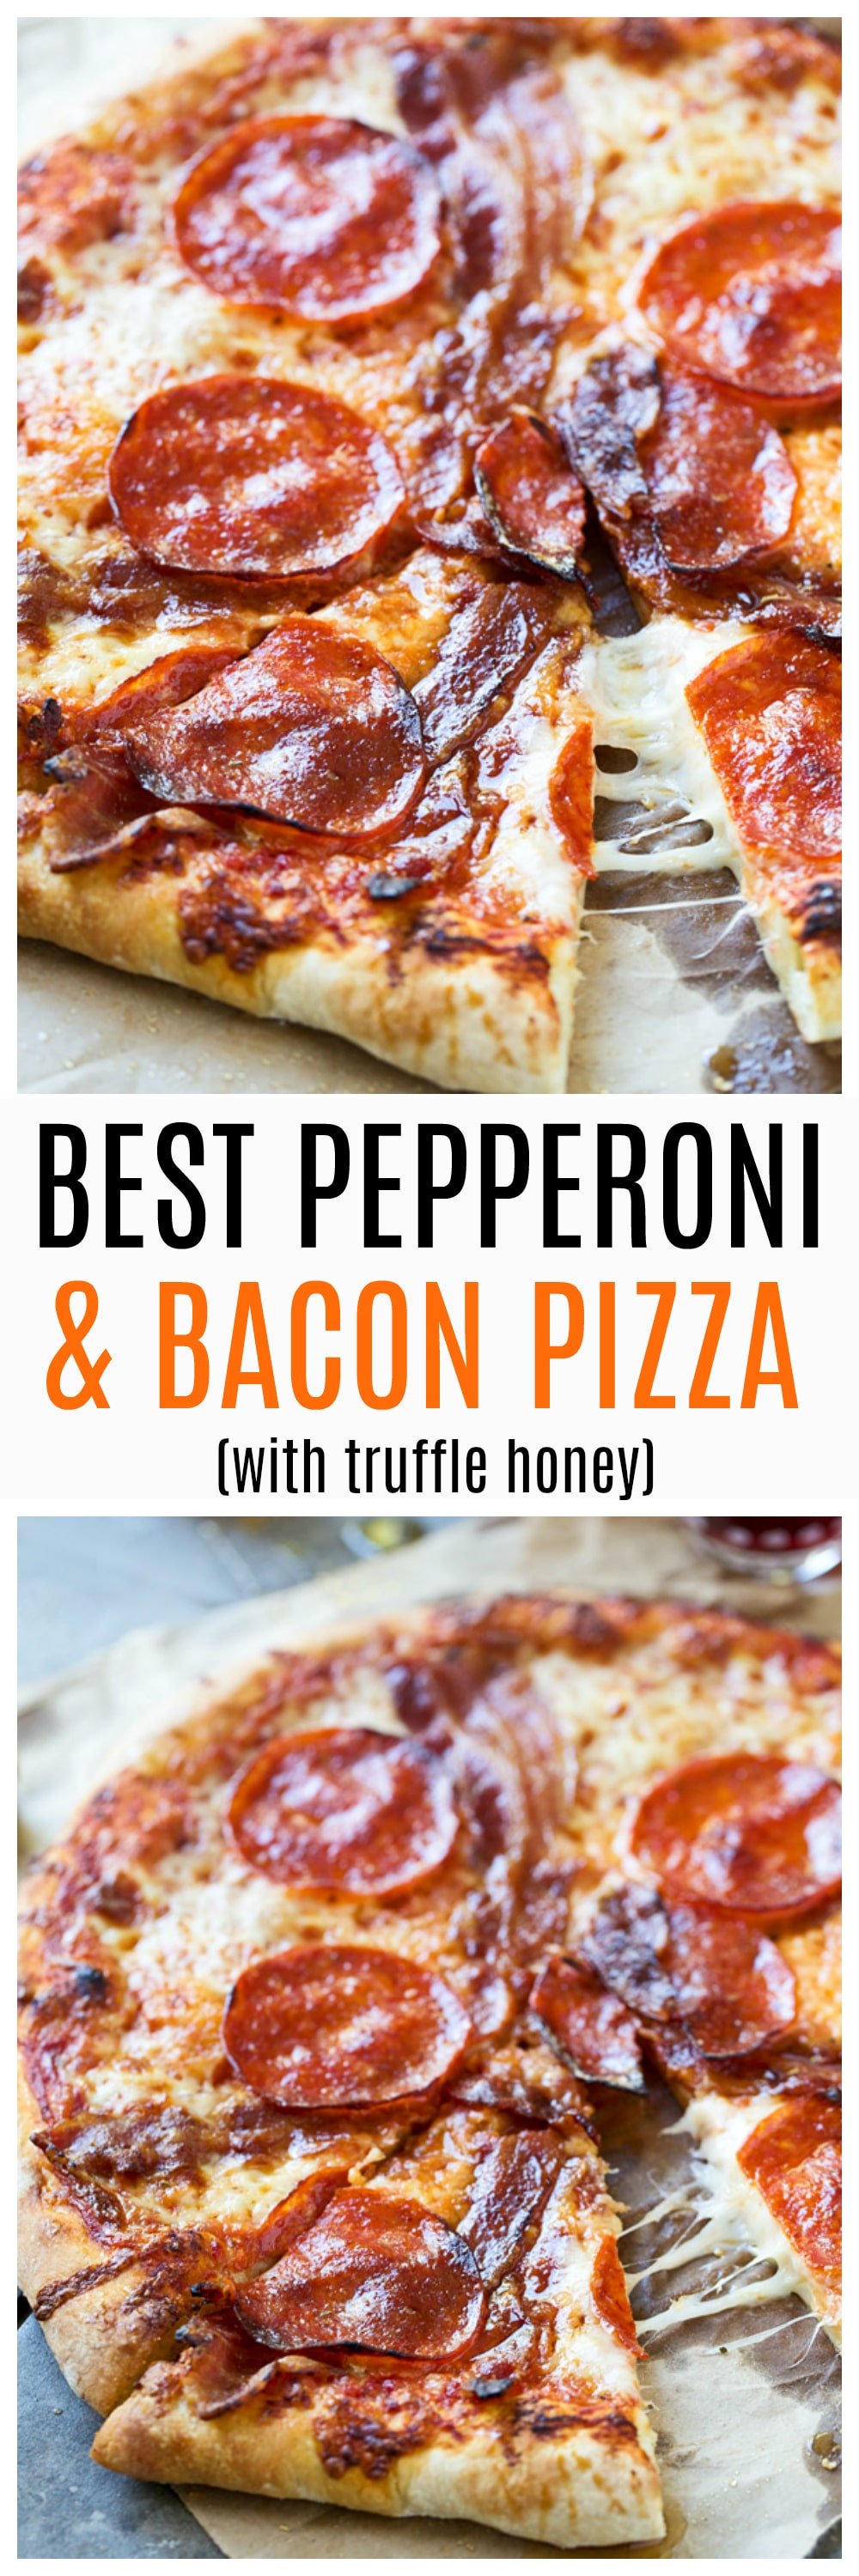 Best Pepperoni & Bacon Pizza with Truffle Honey